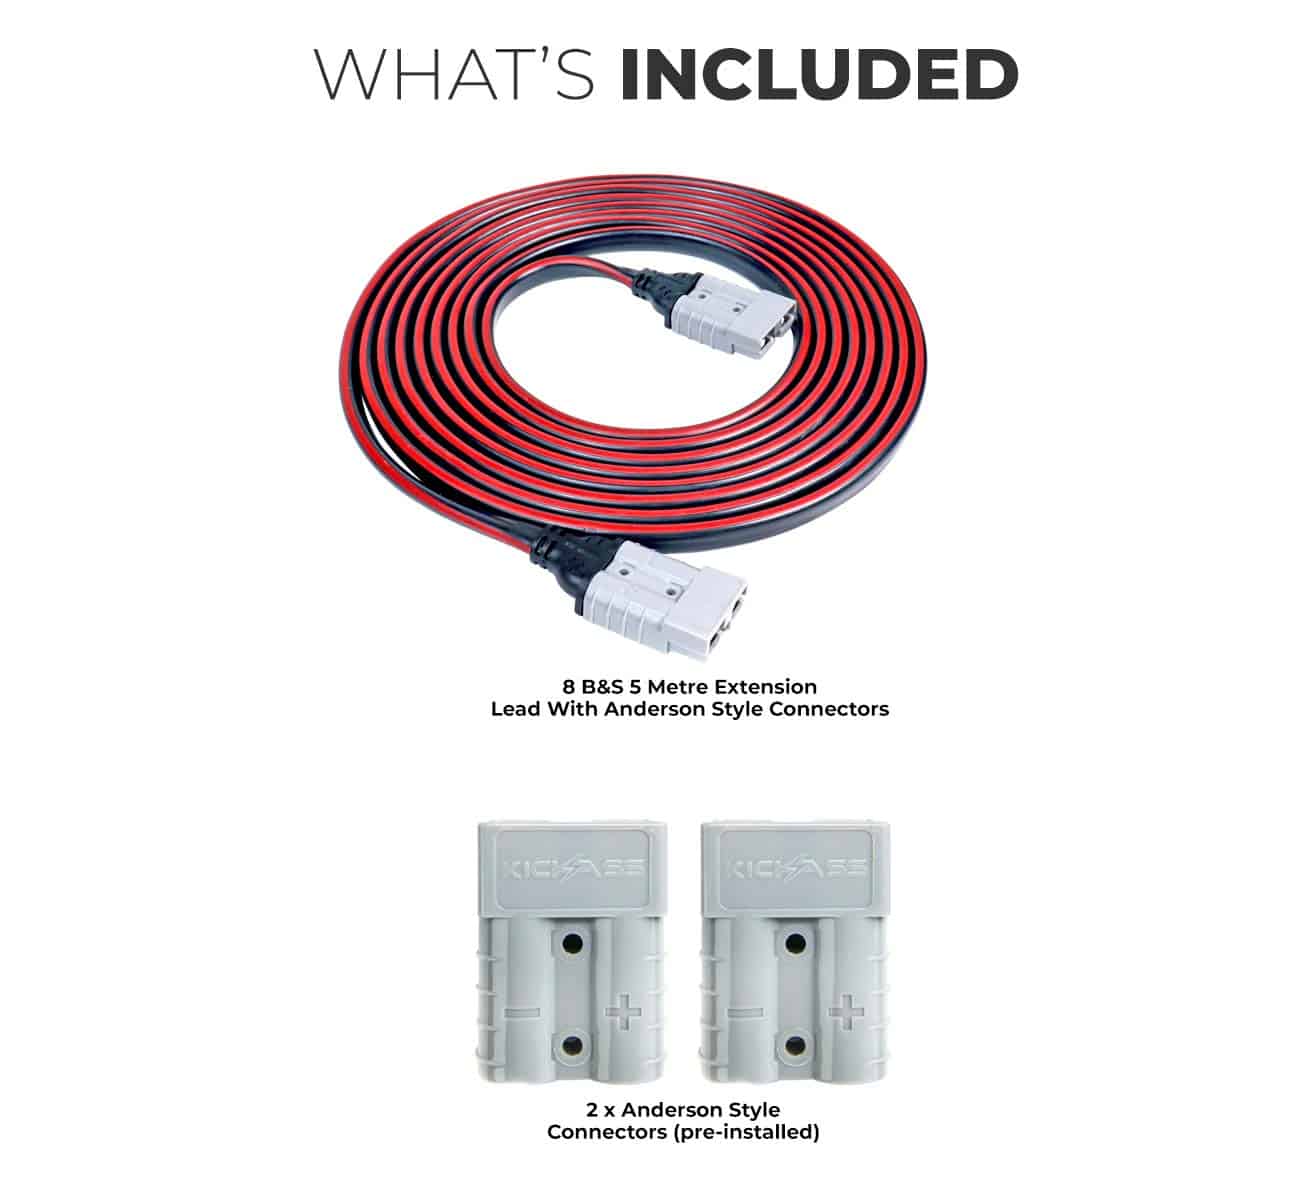 KA8M5-A2A - KICKASS 8 B&S 5 Metre Extension Lead With Anderson Style Connectors